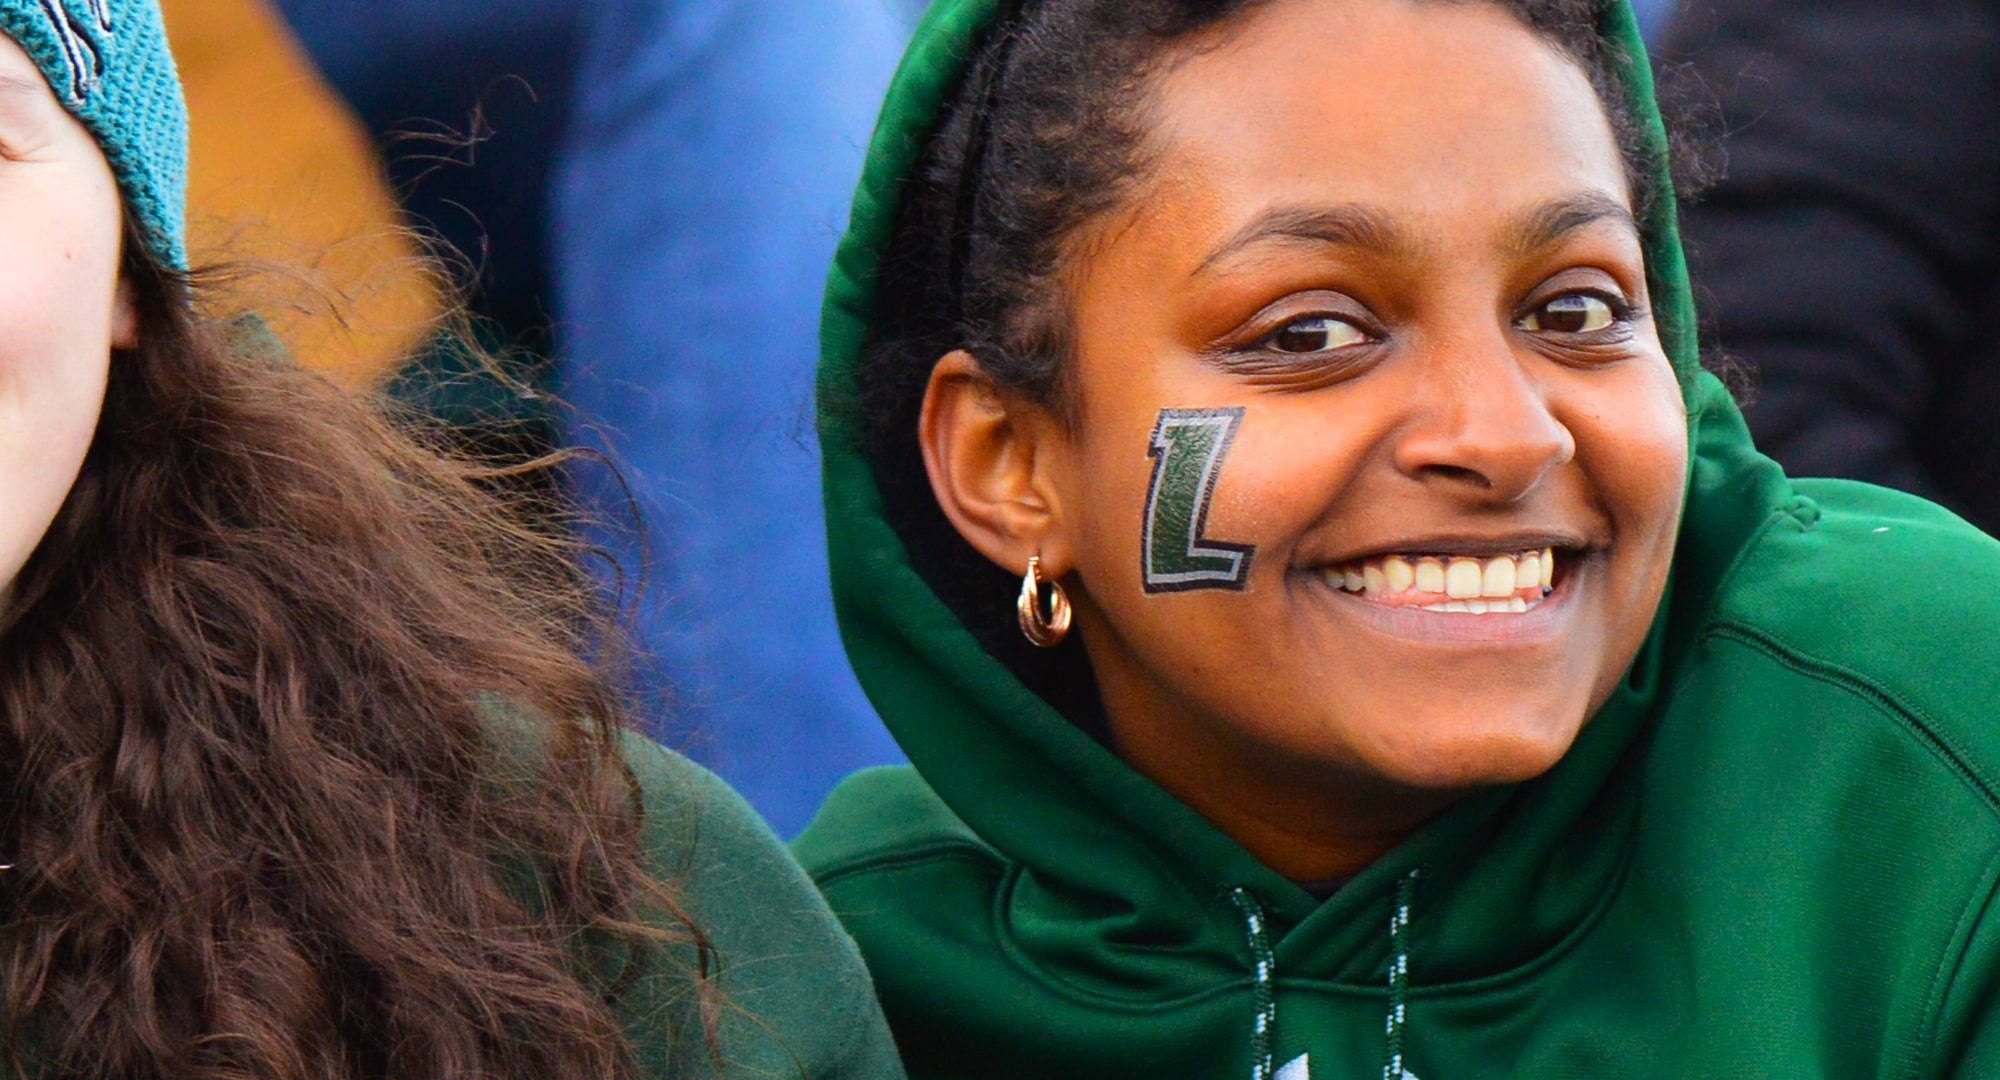 Loyola student at an athletics event